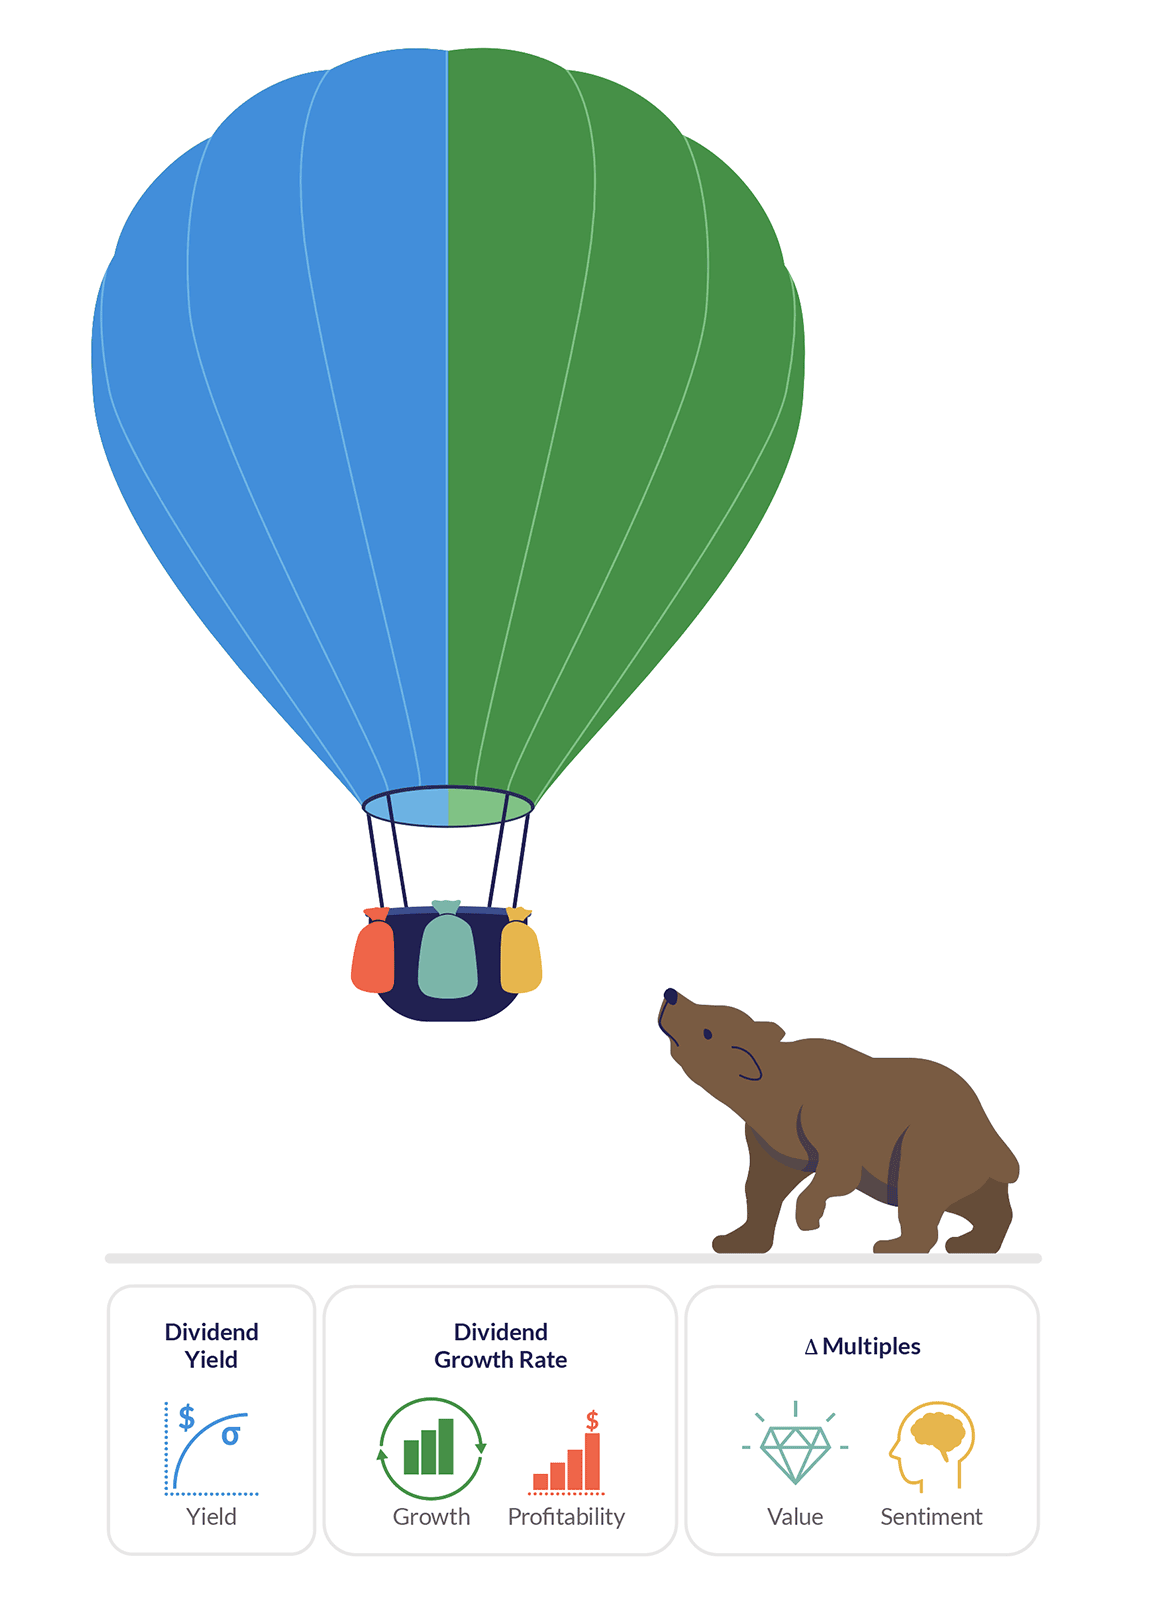 Illustration of grizzly bear looking up at hot air balloon